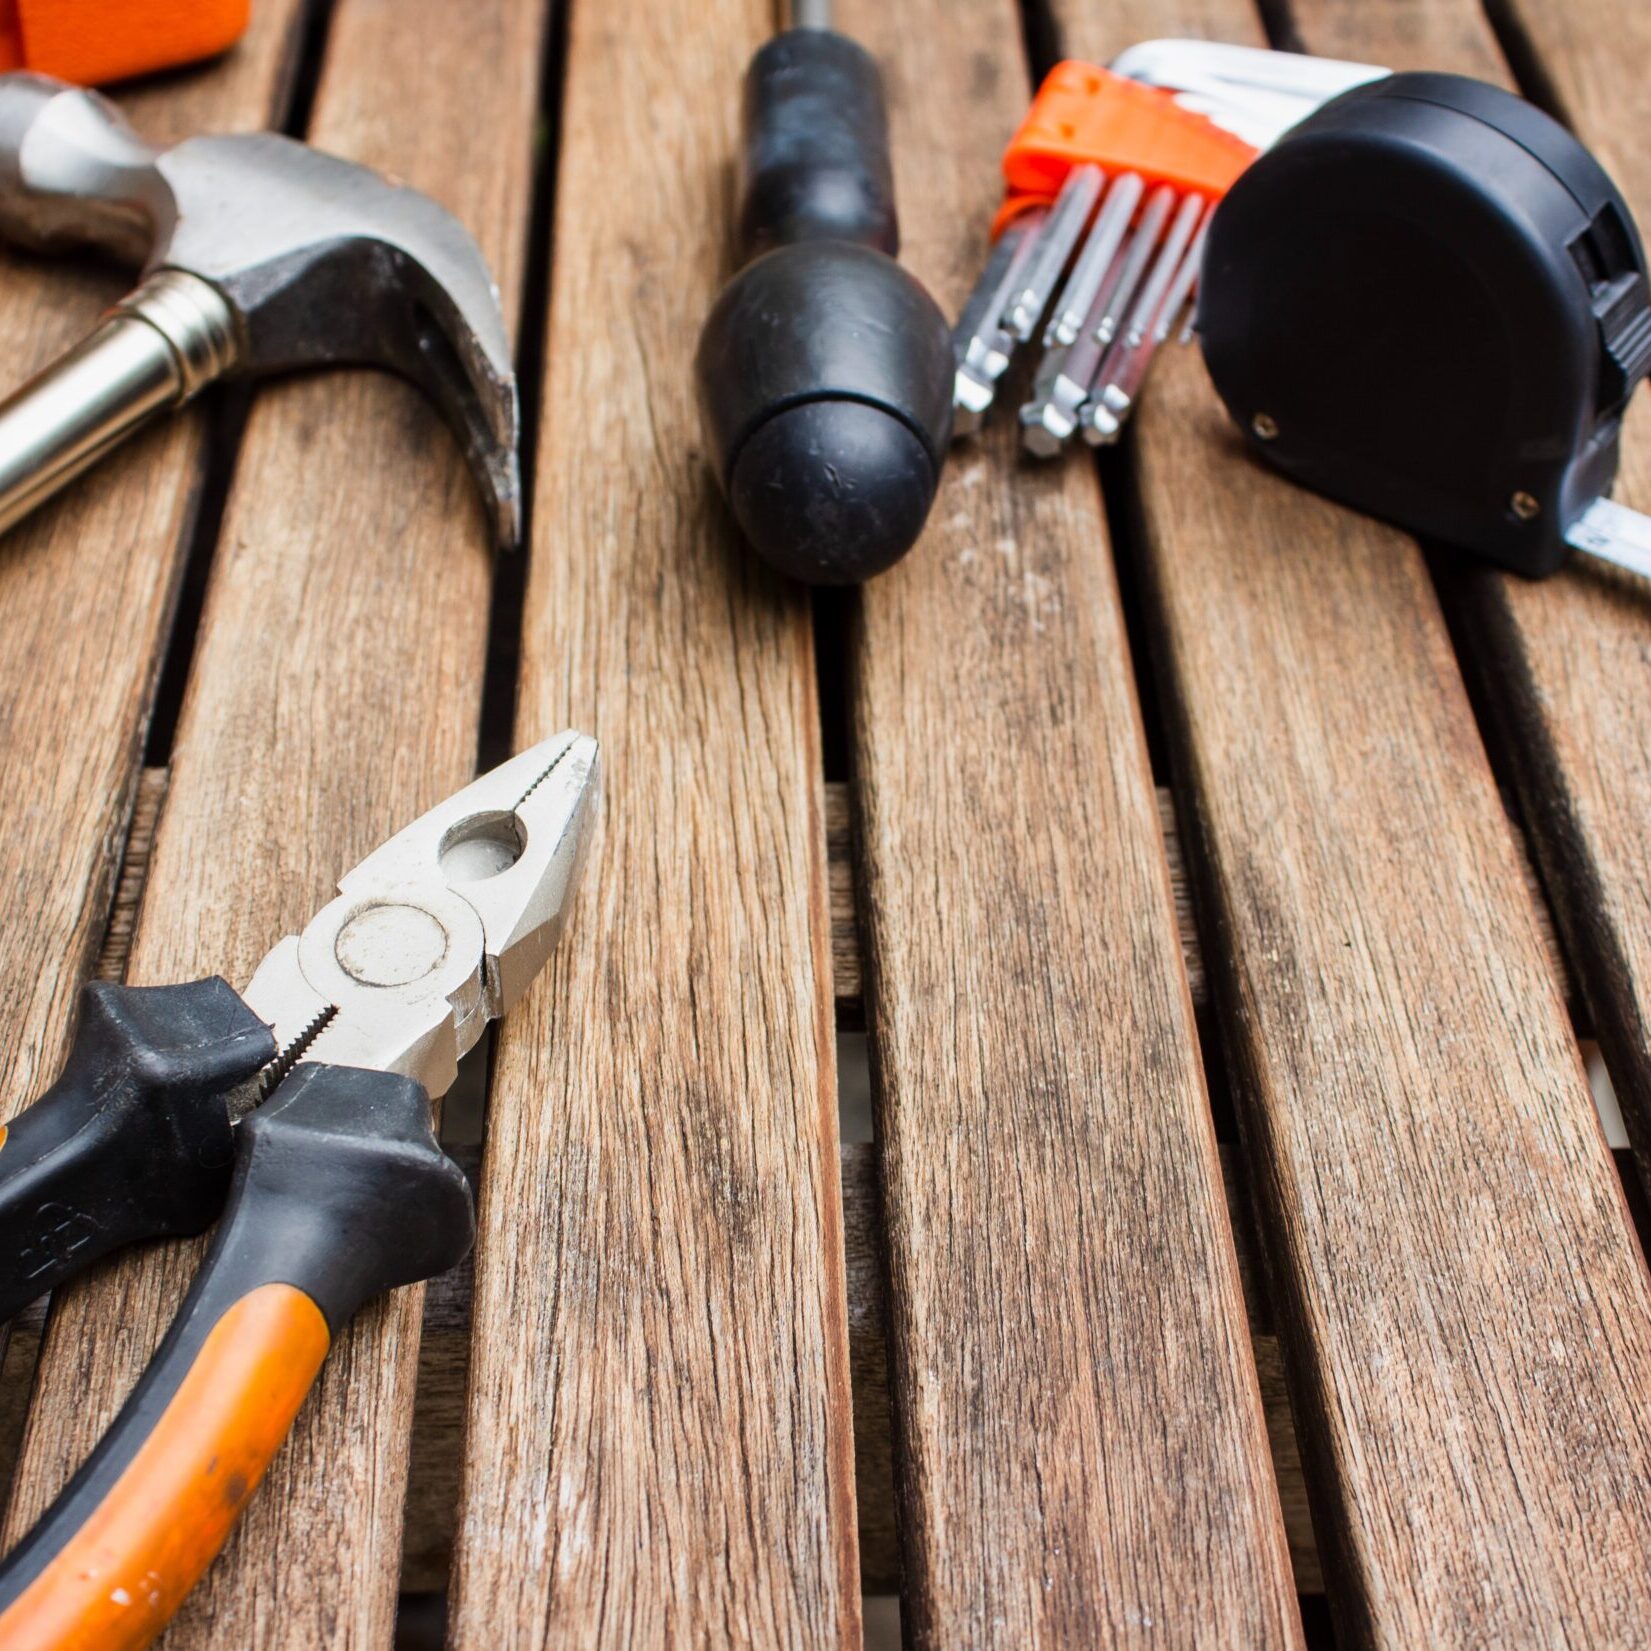 An array of tools on a wooden structure, including a hammer, pliers, a tape measure and more